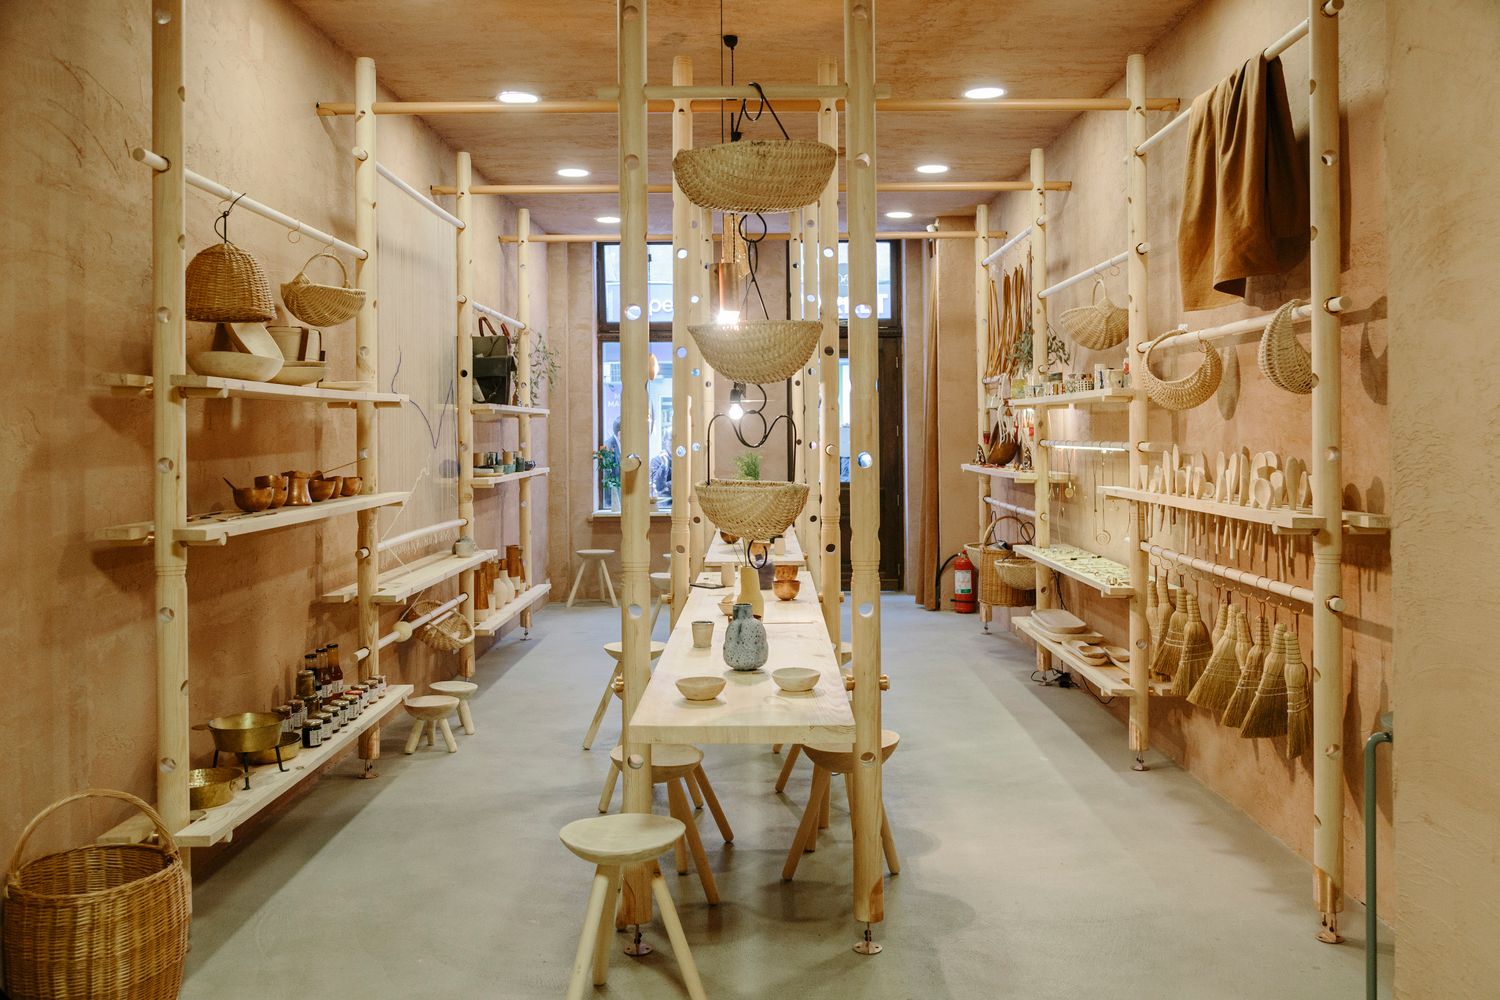 A shop in Bucharest to promote traditional Romany craftsmanship